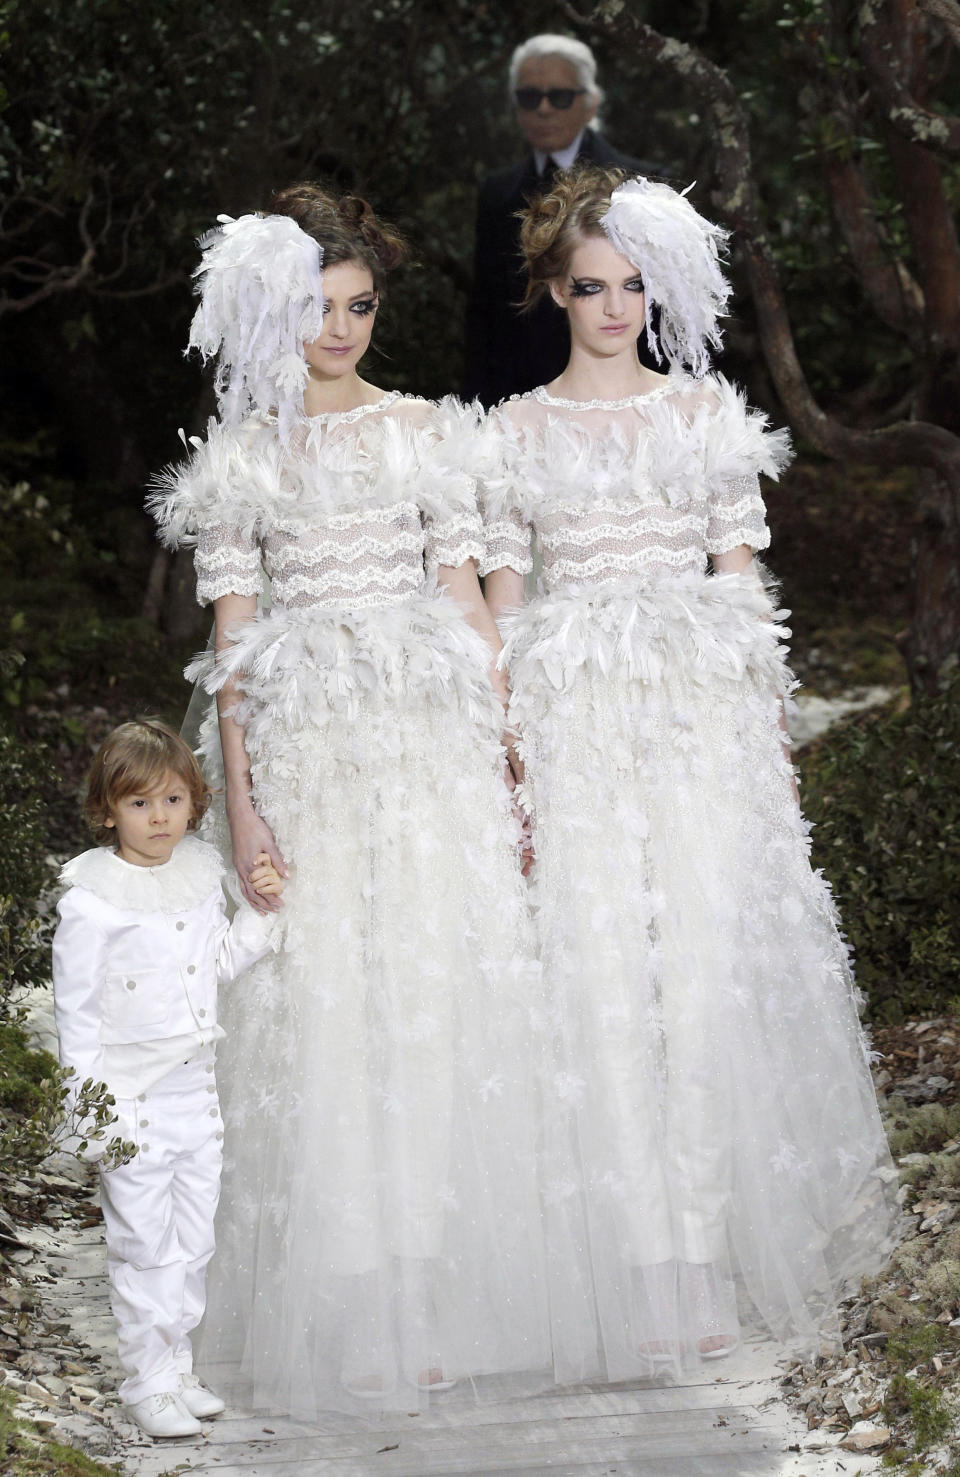 FILE - This Jan. 22, 2013 file photo shows two models wear wedding gowns by German fashion designer Karl Lagerfeld for Chanel's Spring Summer 2013 Haute Couture fashion collection, in Paris. Lagerfeld used fashion to support a controversial French gay marriage law, sending two brides together down the catwalk. (AP Photo/Christophe Ena, File)